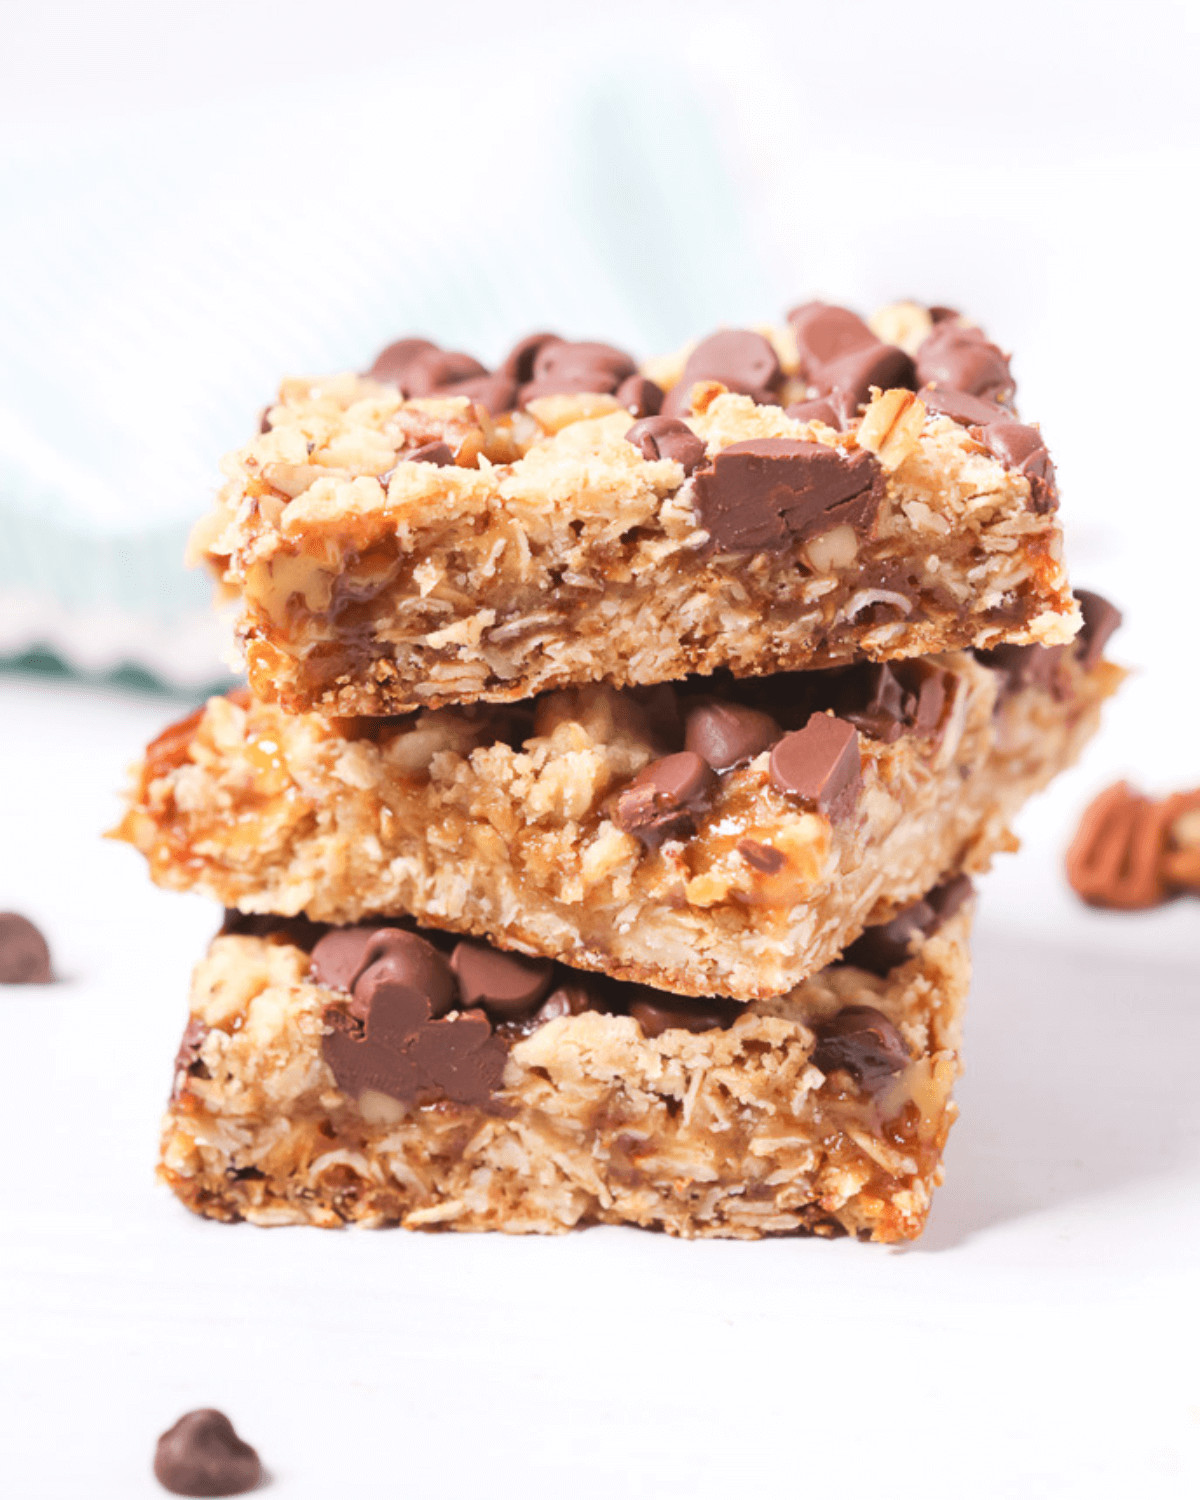 A stack of caramel chocolate oat bars with chocolate chips.